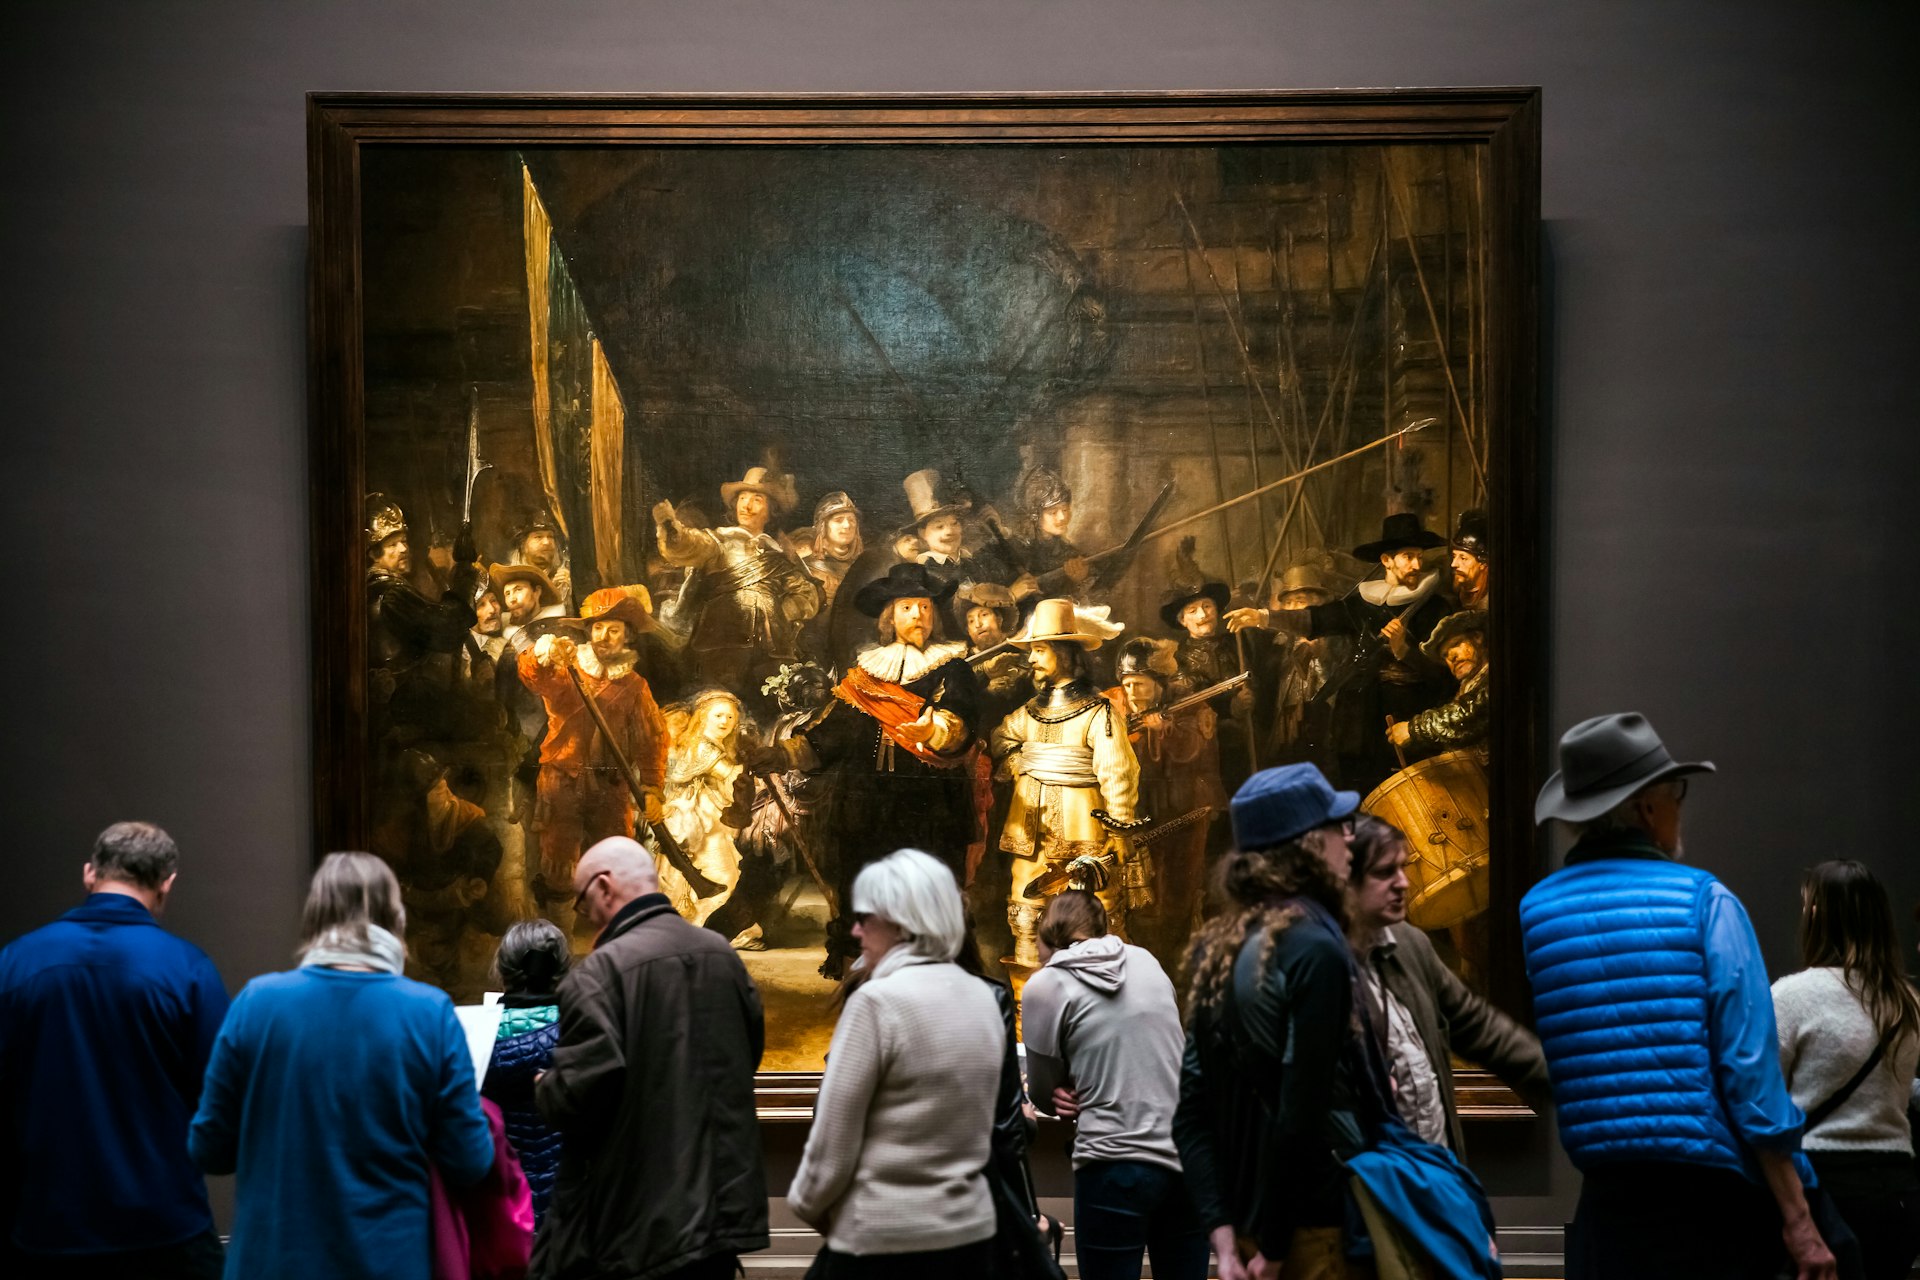 A large 17th-century painting mounted on the wall, with many people gathered in front to view it